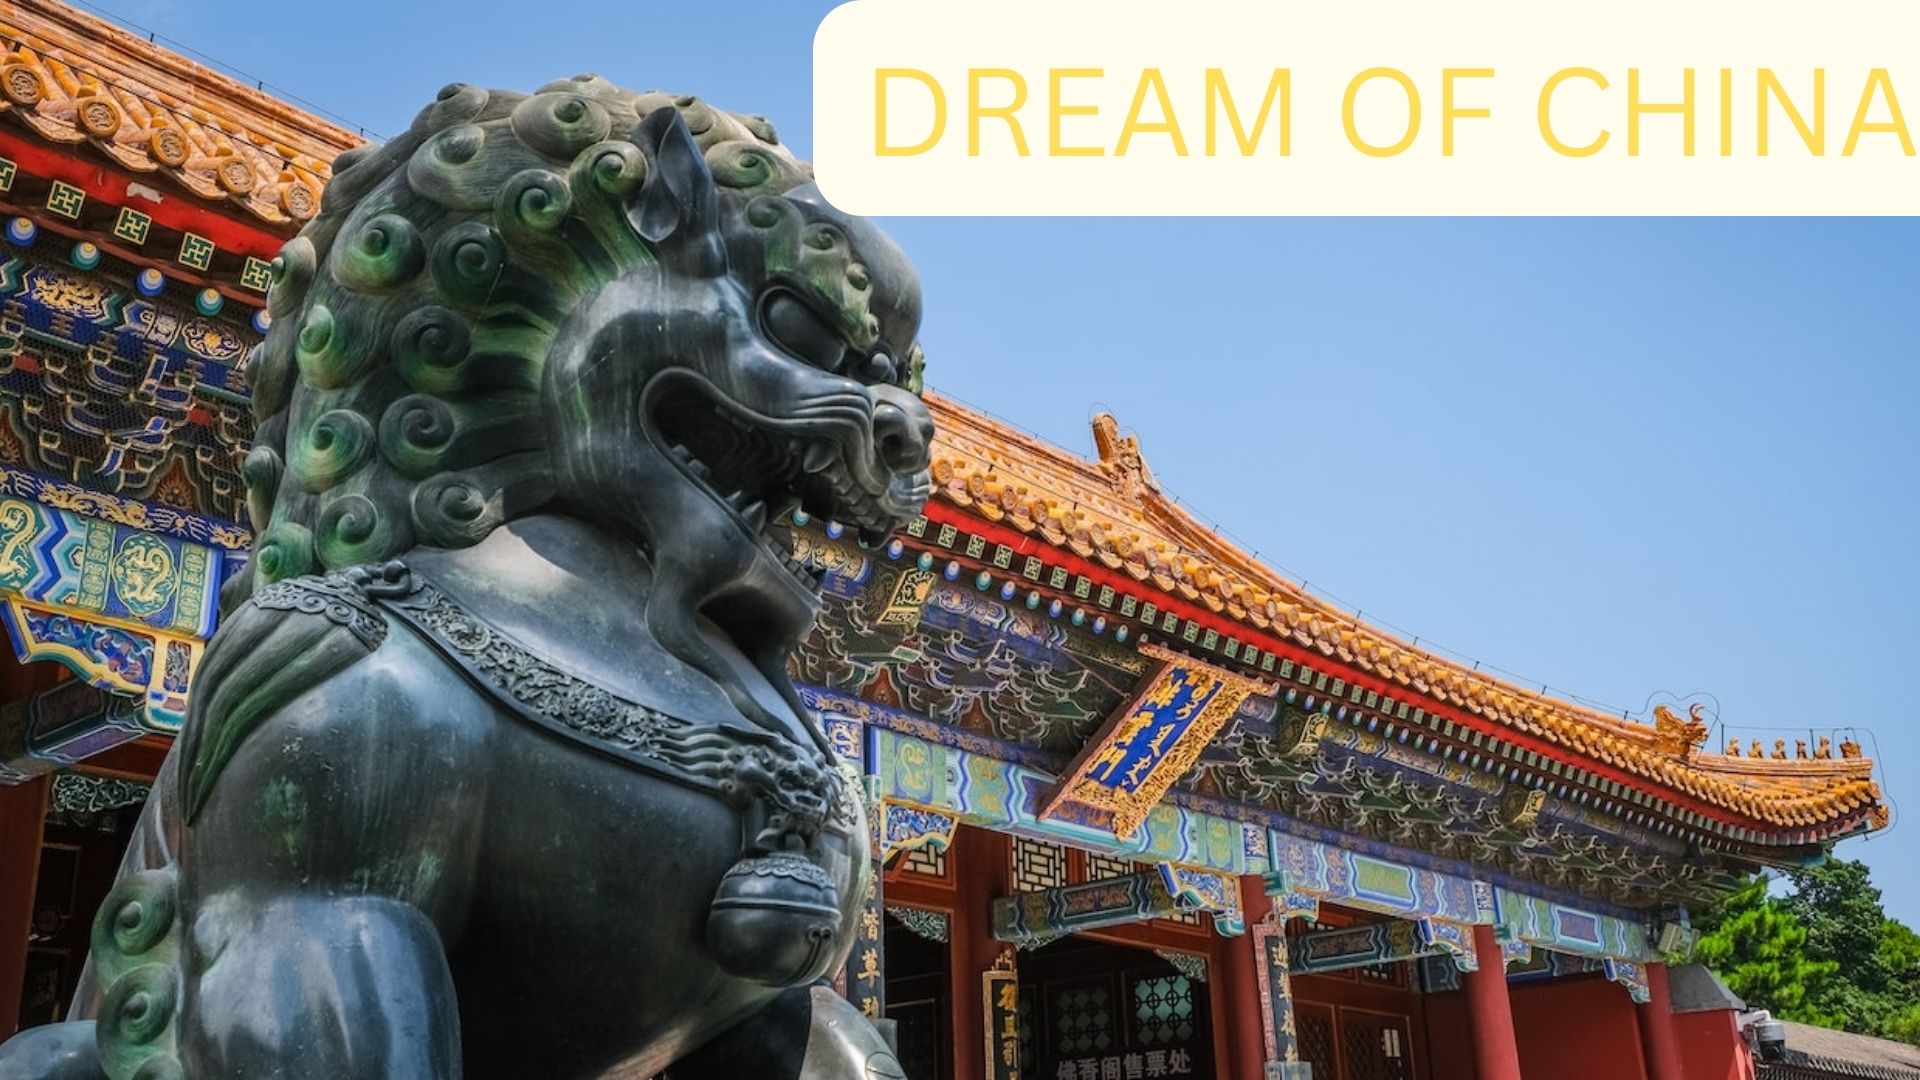 Dream Of China - Meaning And Symbolism